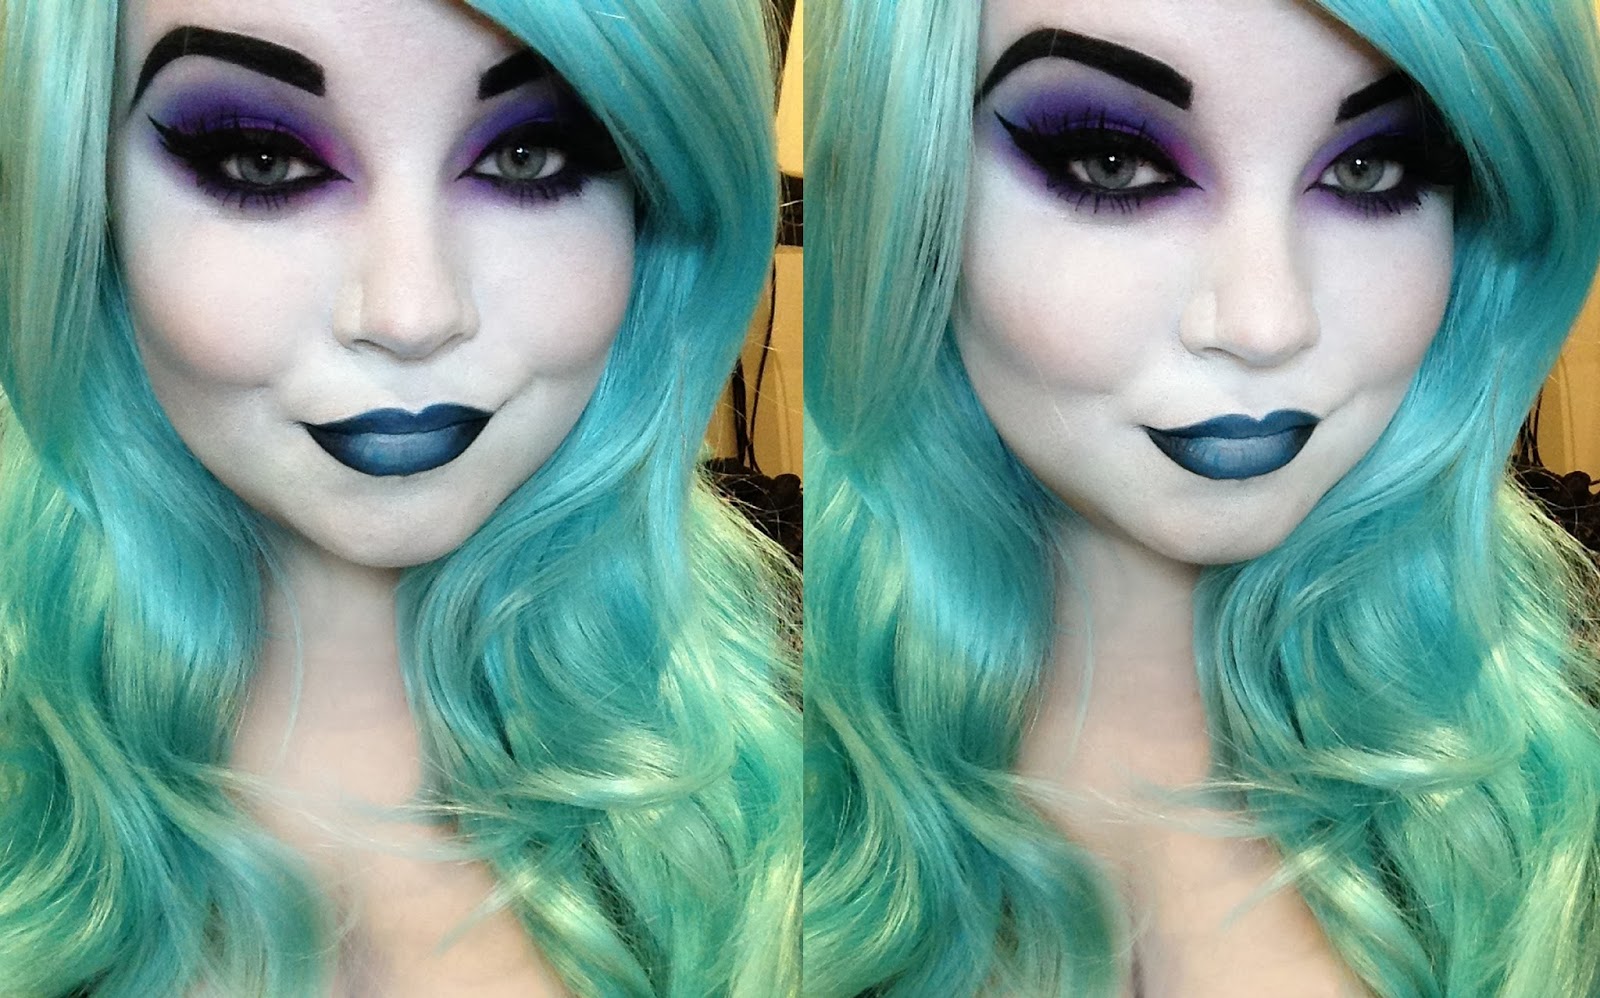 Hades Blue Hair Wig for Halloween - wide 5